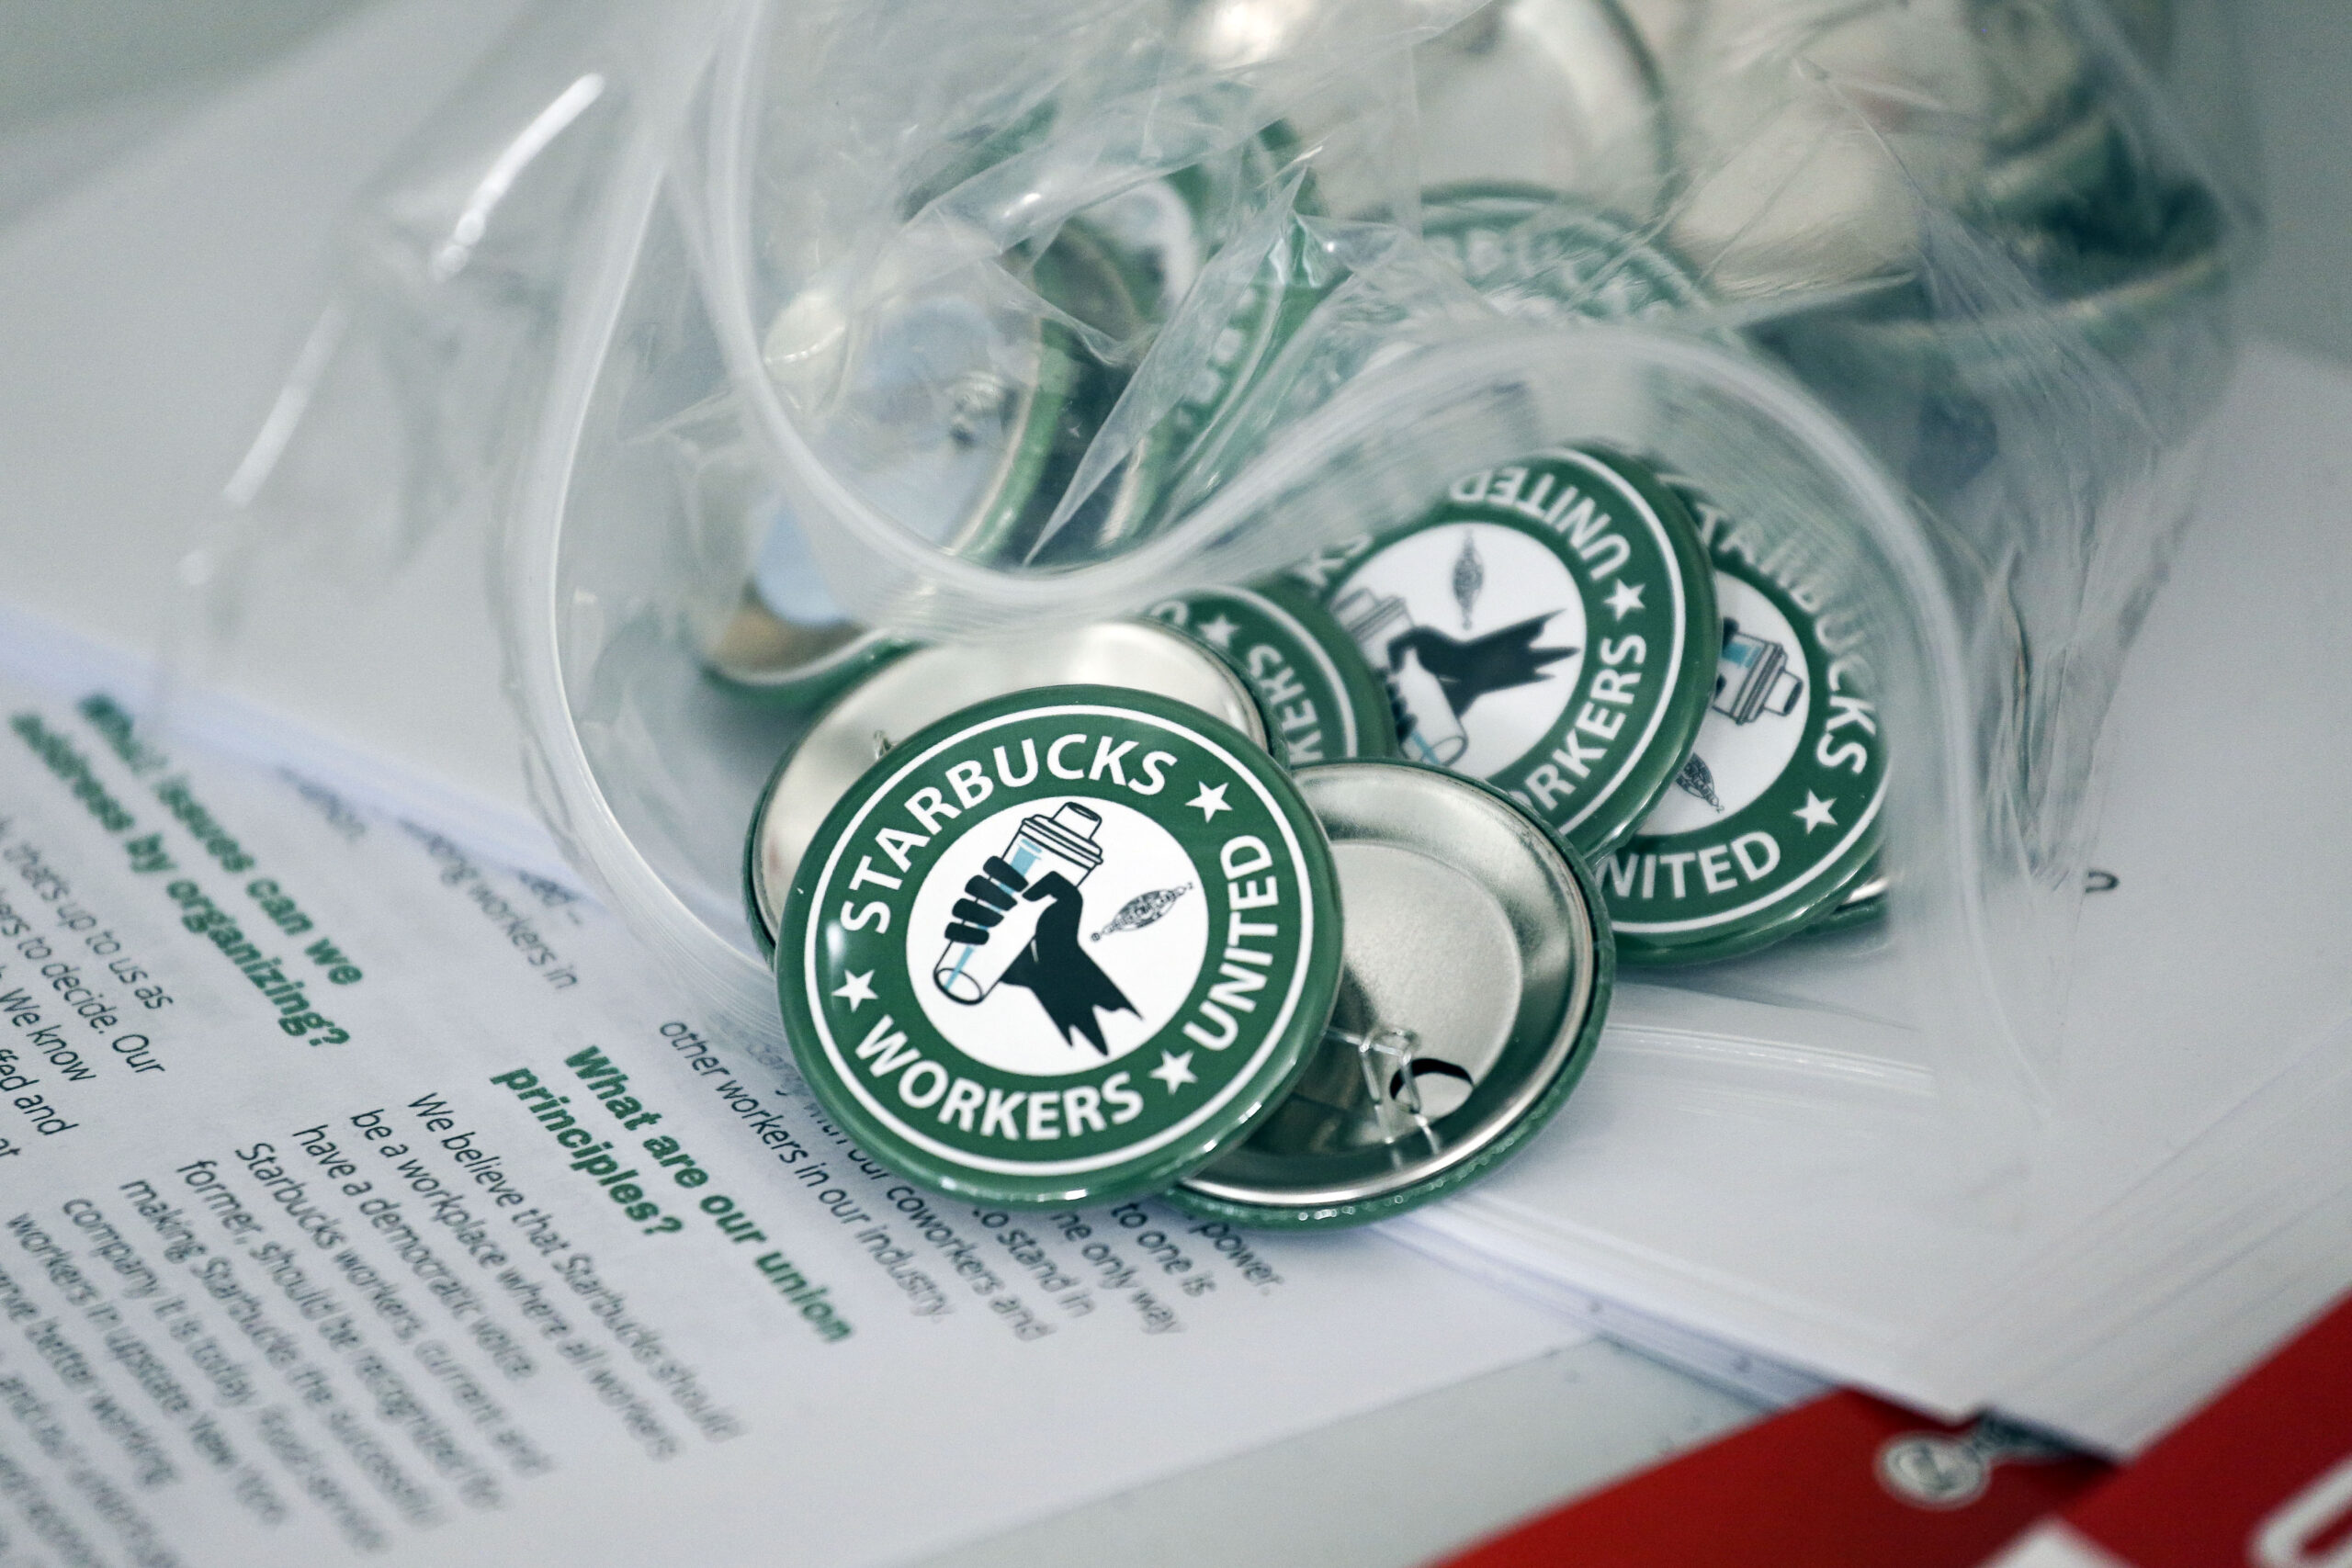 FILE — Pro-union pins sit on a table during a watch party for Starbucks' employees union election, Dec. 9, 2021, in Buffalo, N.Y. Starbucks is asking the National Labor Relations Board to temporarily suspend all union elections at its U.S. stores in response to allegations of improper coordination between regional NLRB officials and the union. (AP Photo/Joshua Bessex, File)